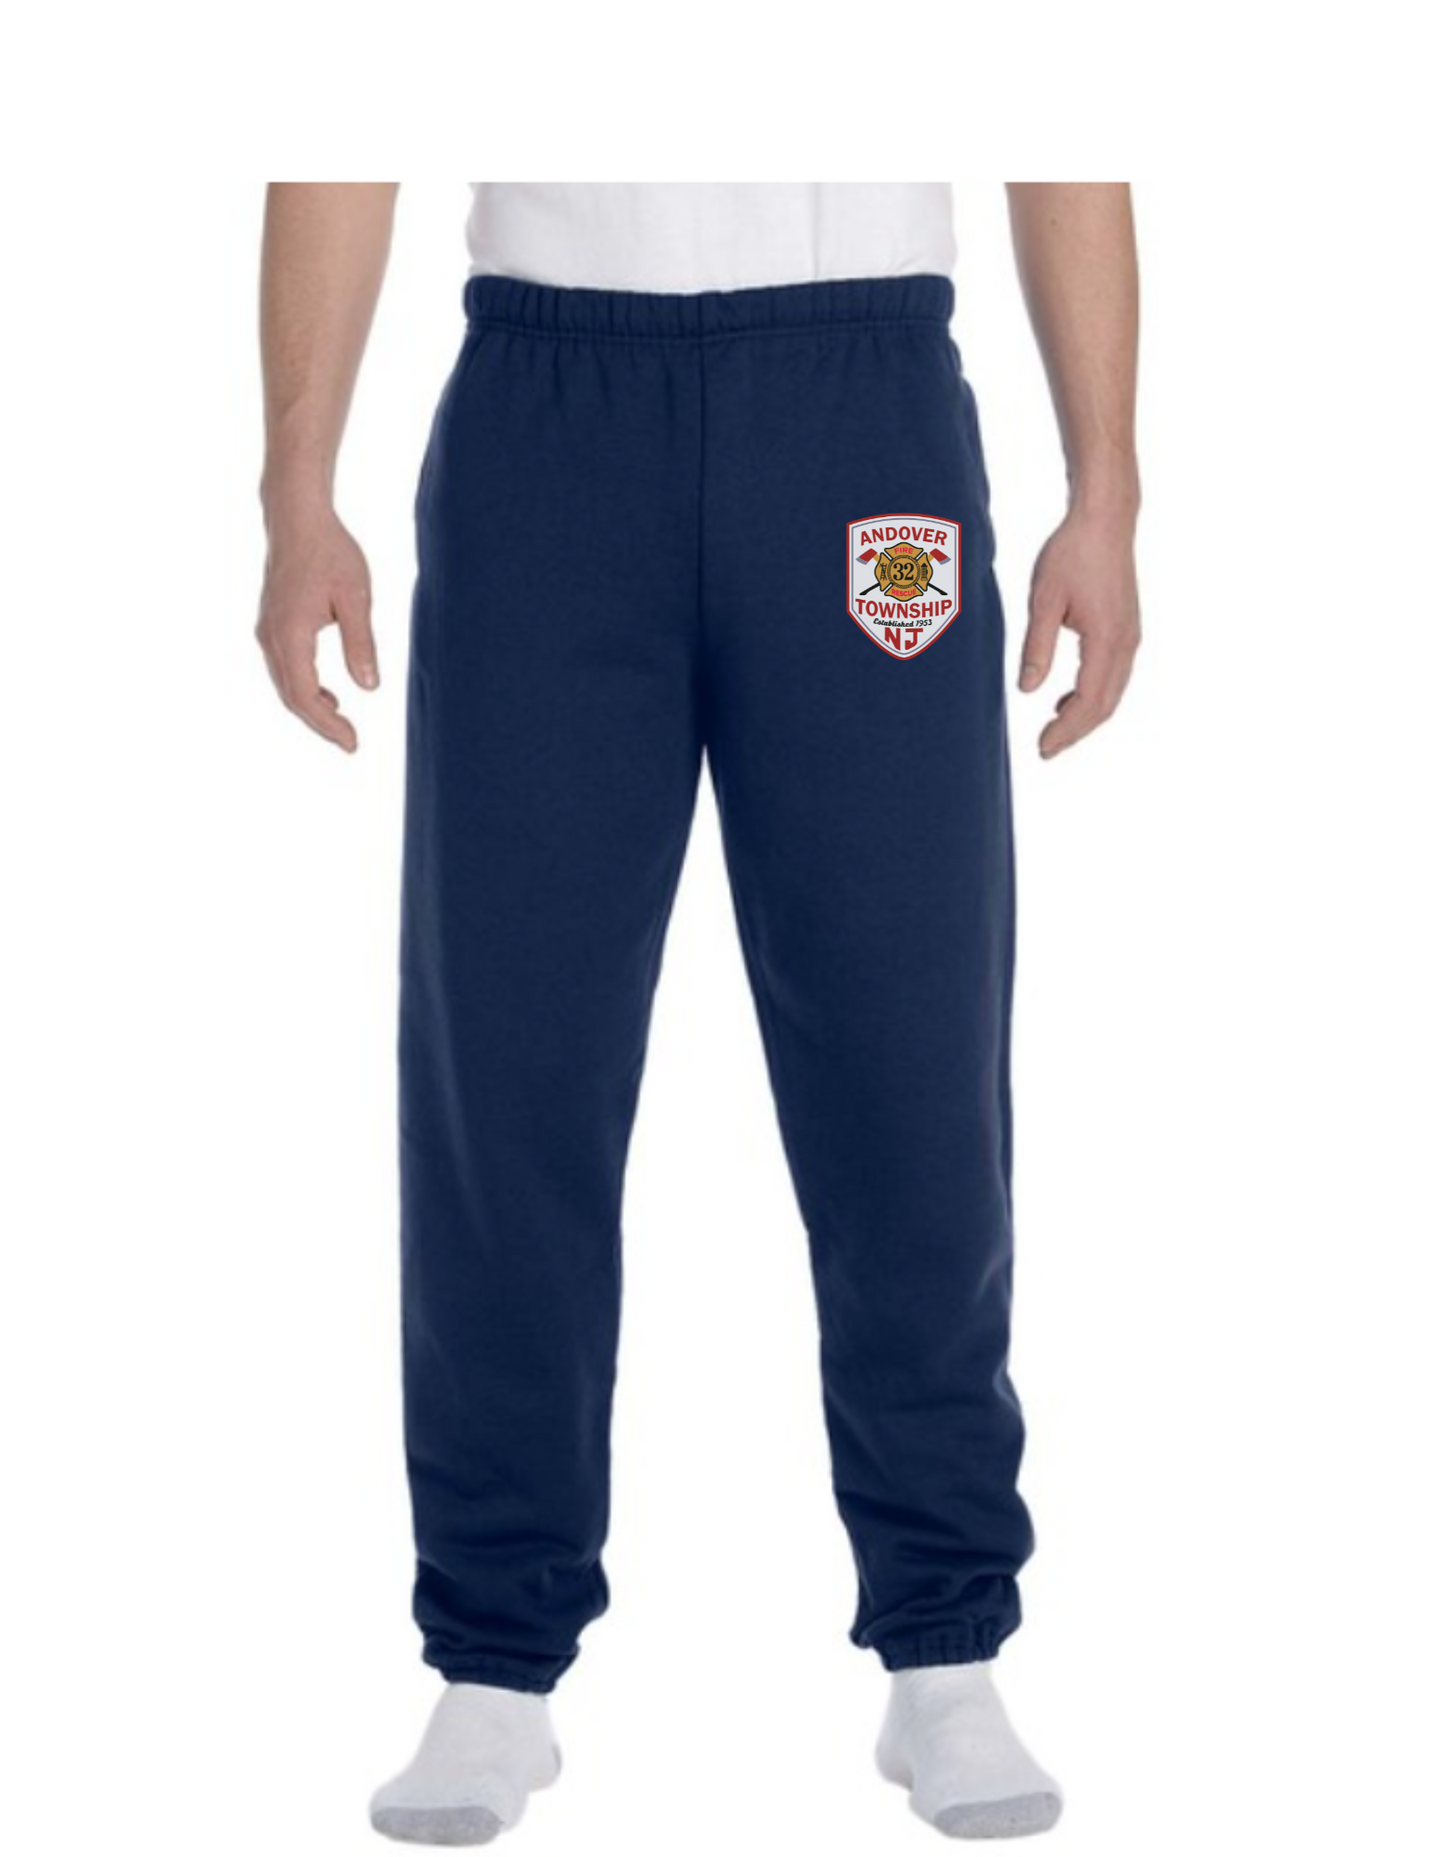 Andover Township Fire Fleece Sweatpants With Pockets